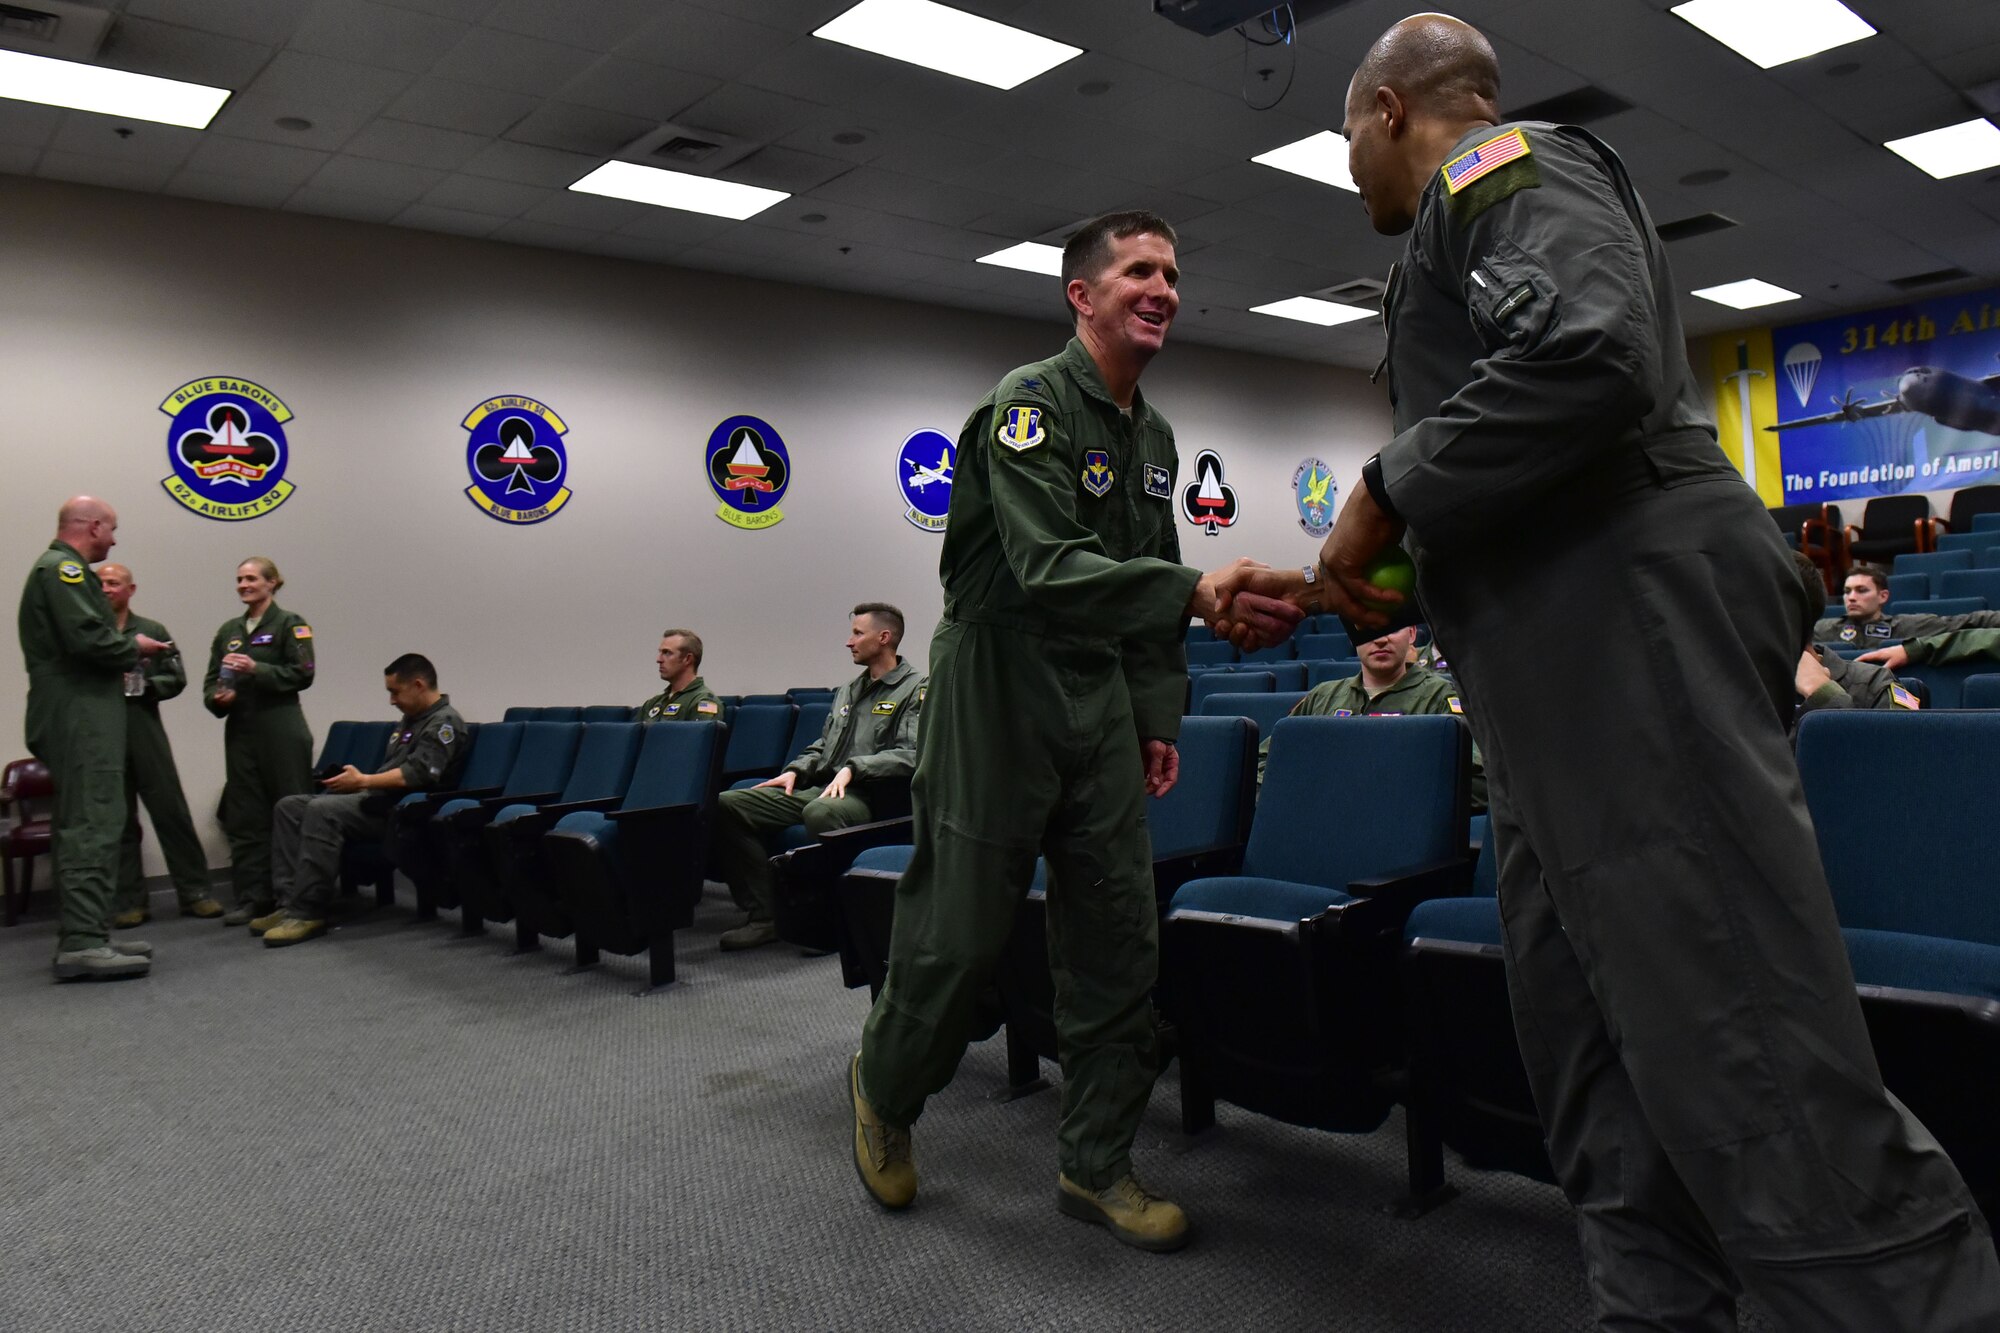 Airmen meet each other and prepare for a briefing.